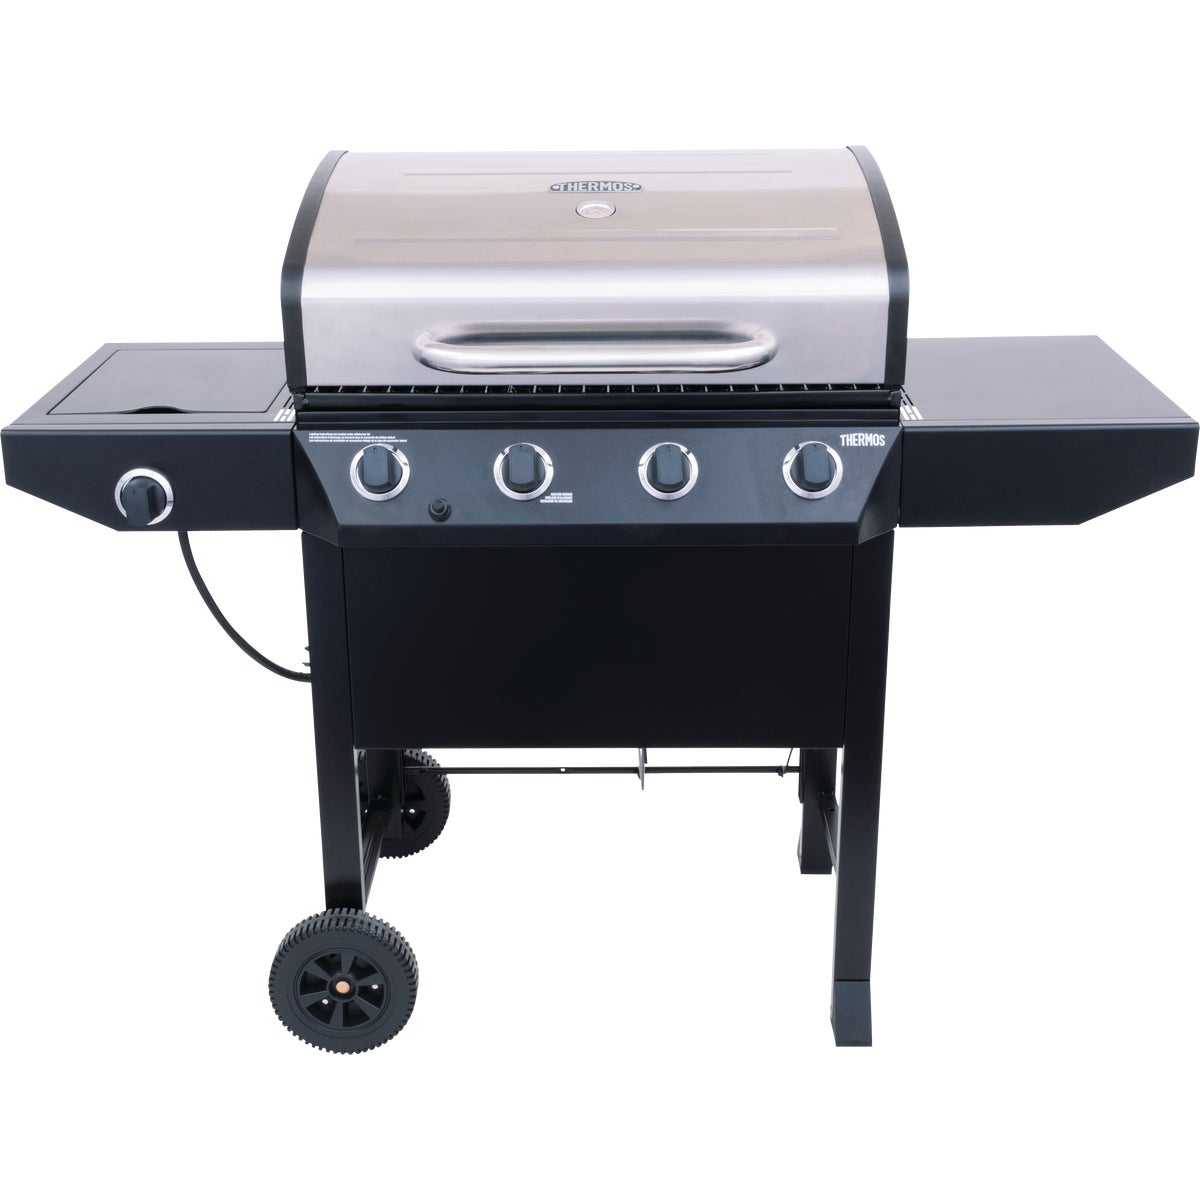 Item 819832, 4 burner gas grill with side burner. Features 660 Sq. In.